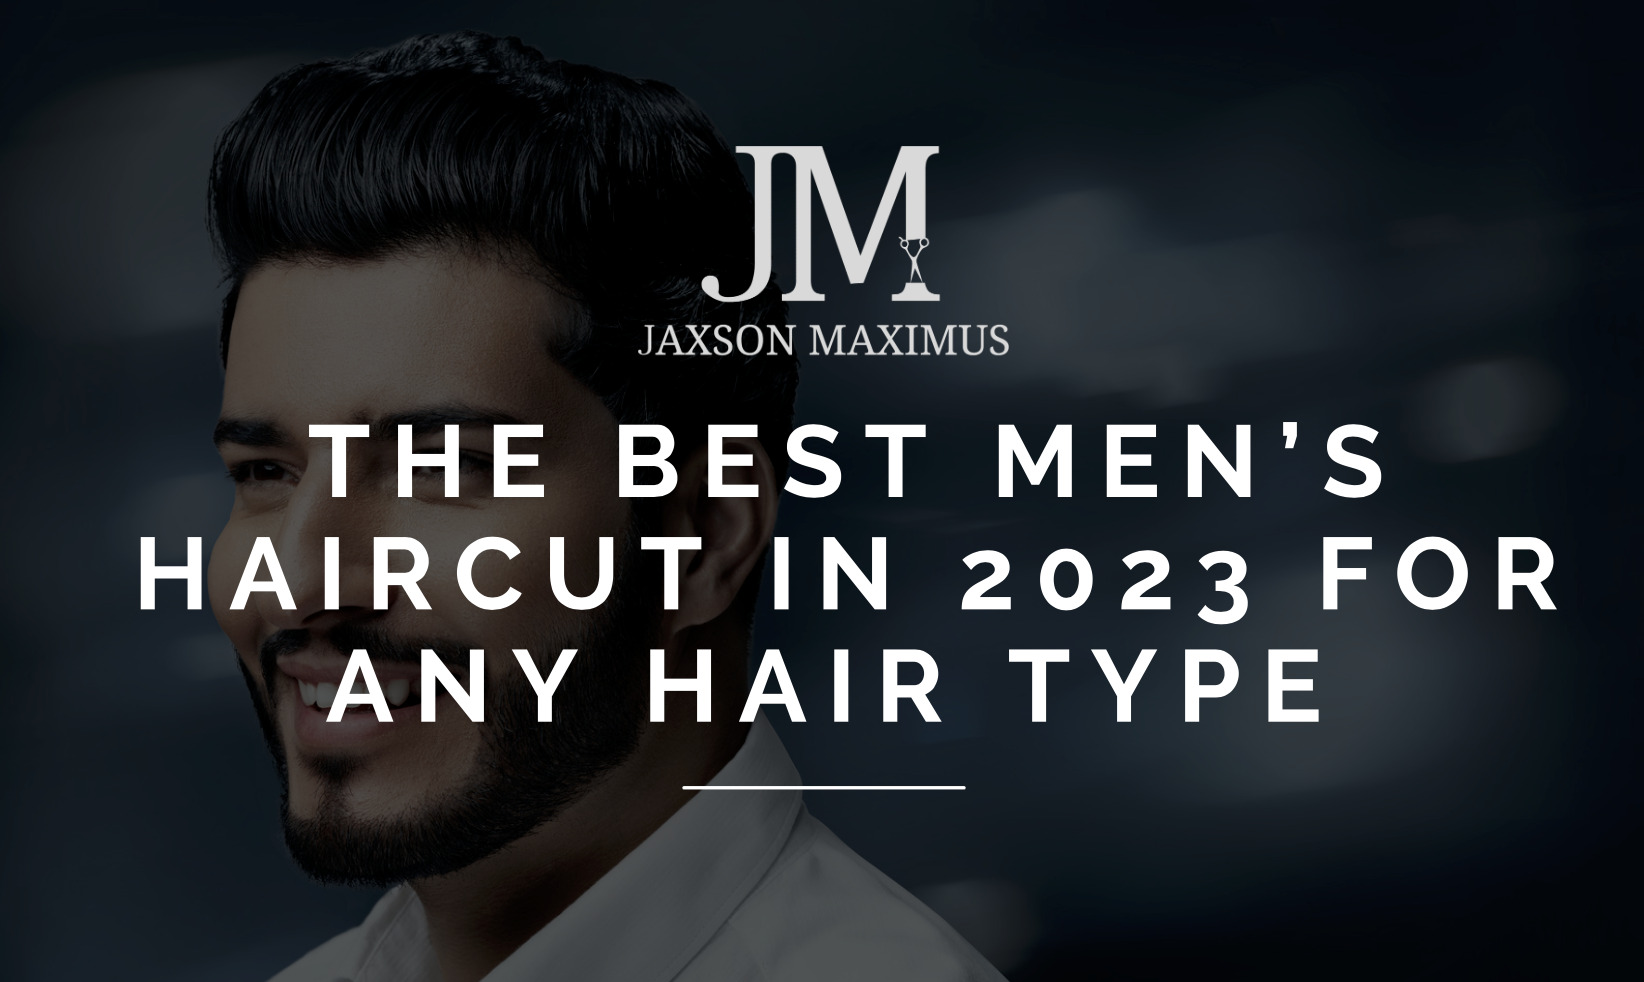 Hairstyles and Haircuts for Boys and Men in 2023 - The Right Hairstyles